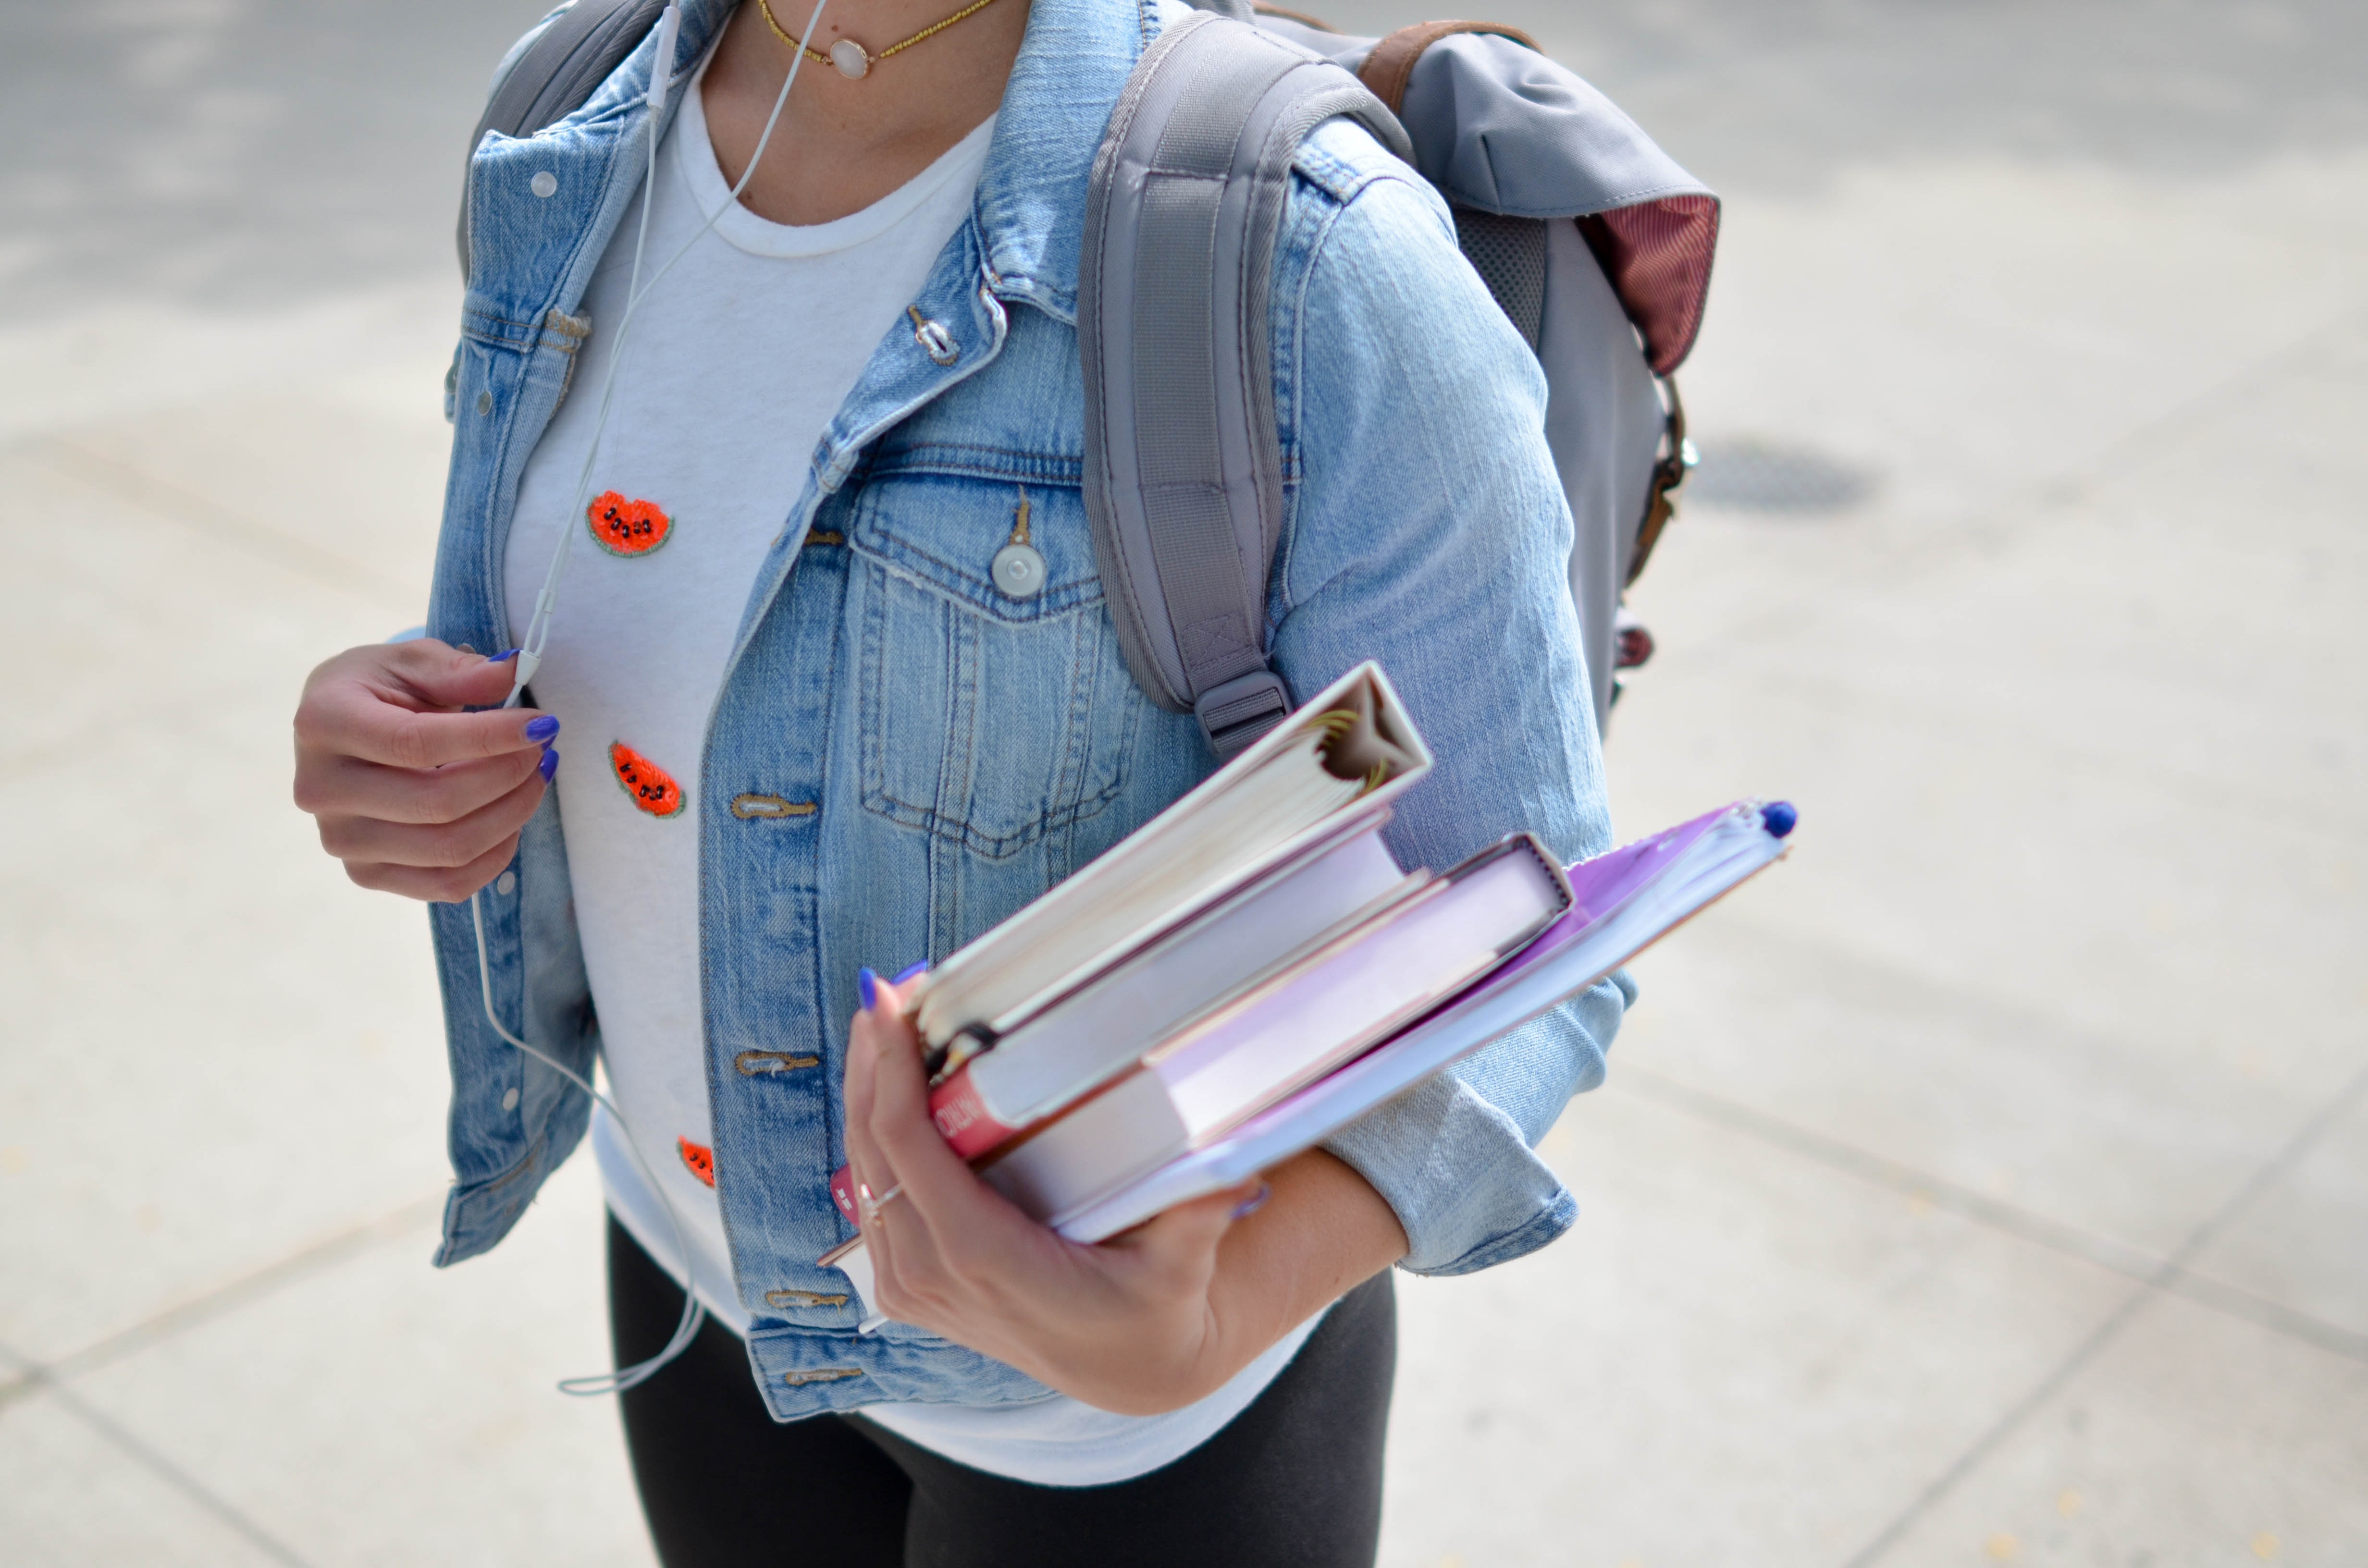 A girl wearing a white shirt and a jeans jacket, carrying some text books.